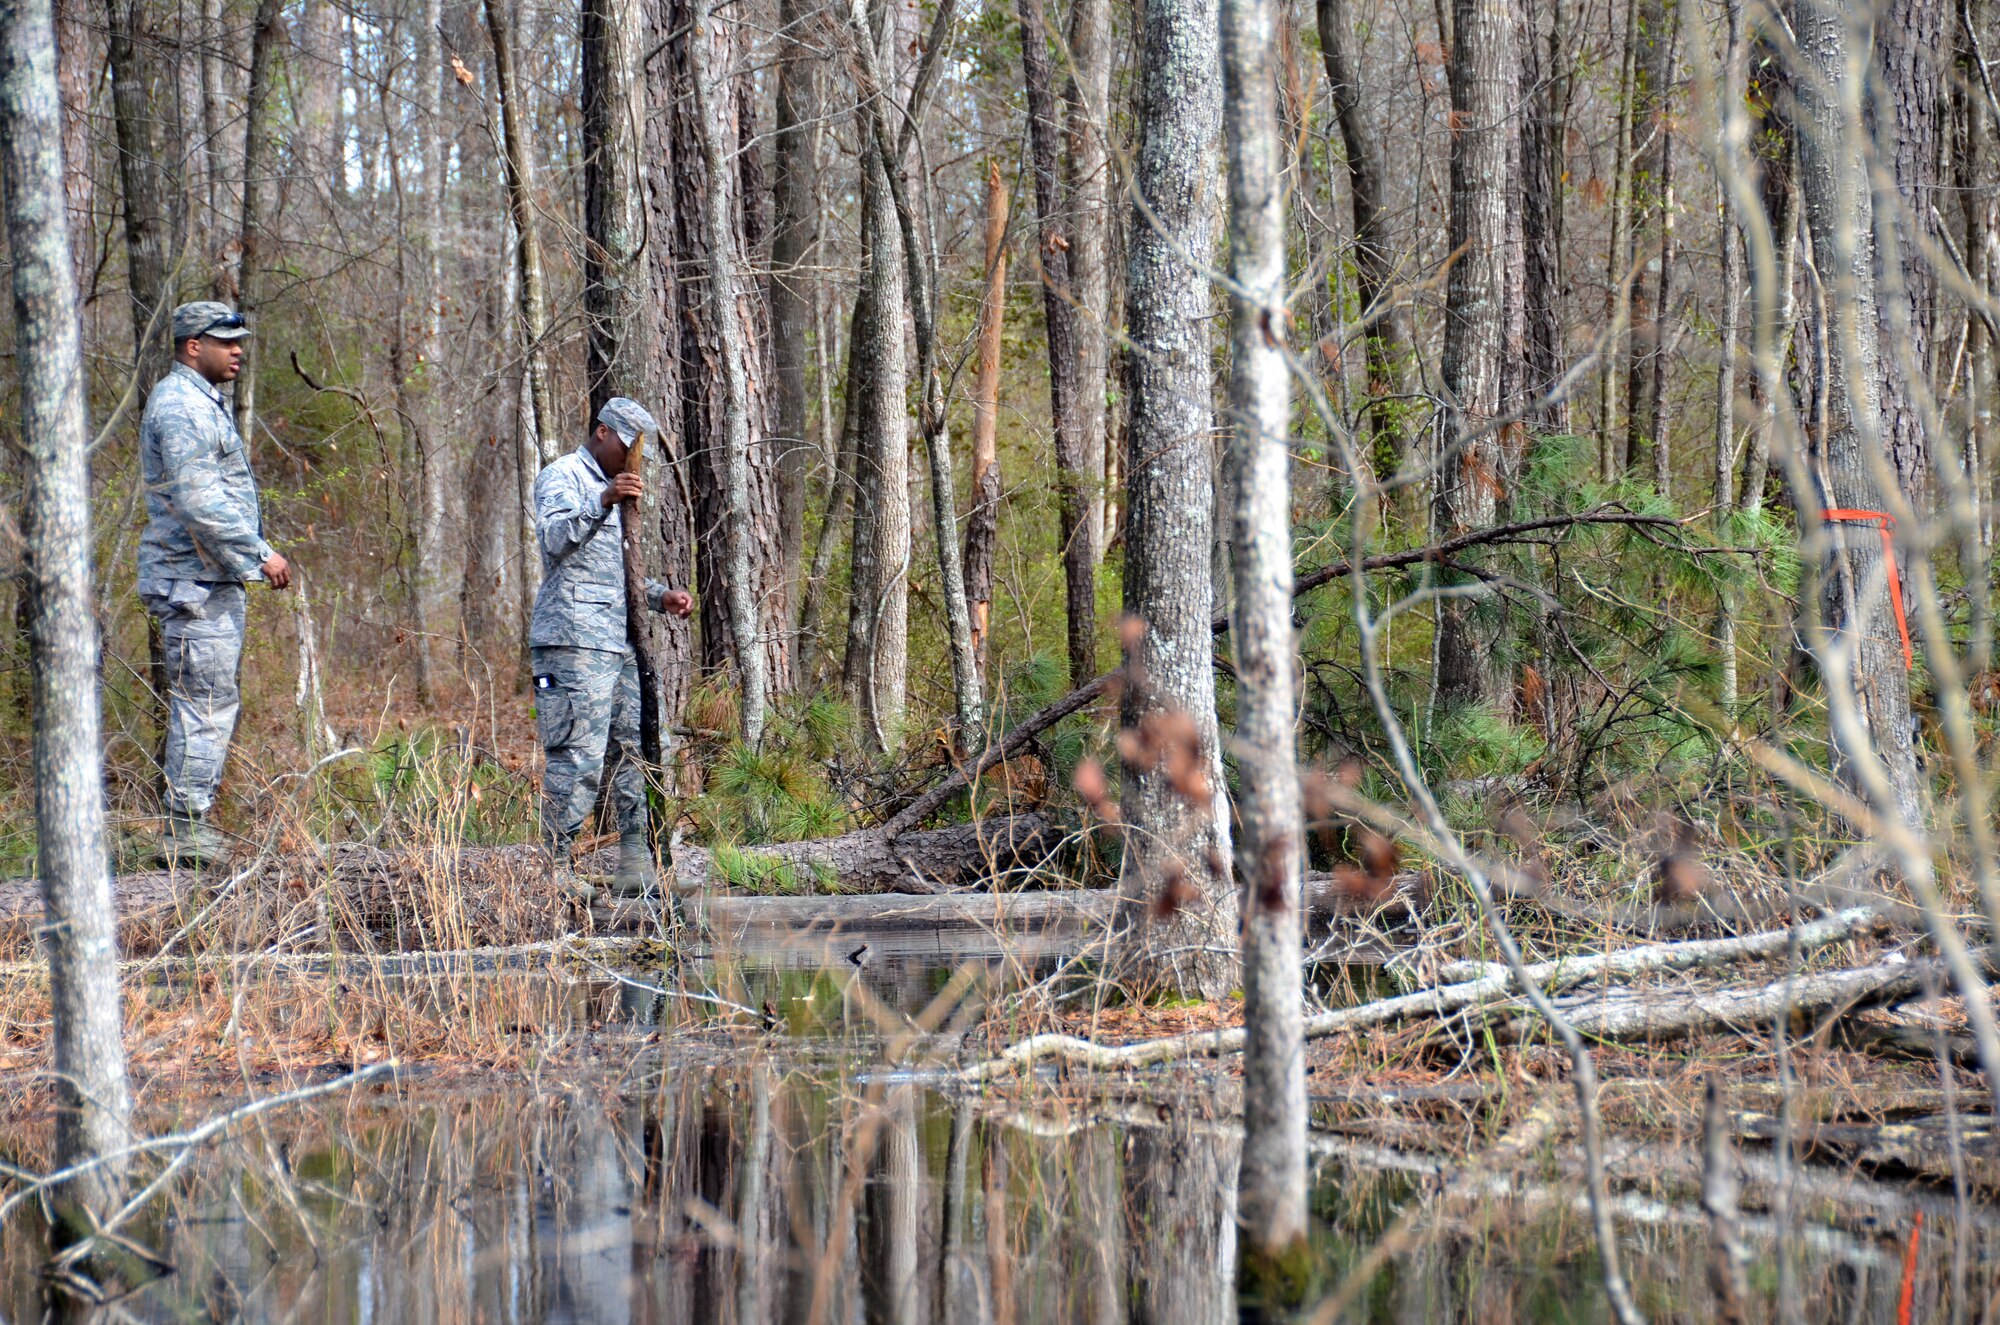 Second Lt. Steven Sumpter, 729th Air Control Squadron, and Airman 1st Class Tyzhe Speights, 51st Combat Communication Squadron, trek through a flooded area to get their designated marker during a land navigation exercise at Robins Air Force Base, Ga., March 2, 2017. The 5th Combat Communications Group provides a two-week course for a maximum of 34 students and covers a variety of topics like land navigation, improvised explosive device detection and much more. (U.S. Air Force photo by Tech. Sgt. Kelly Goonan/released)